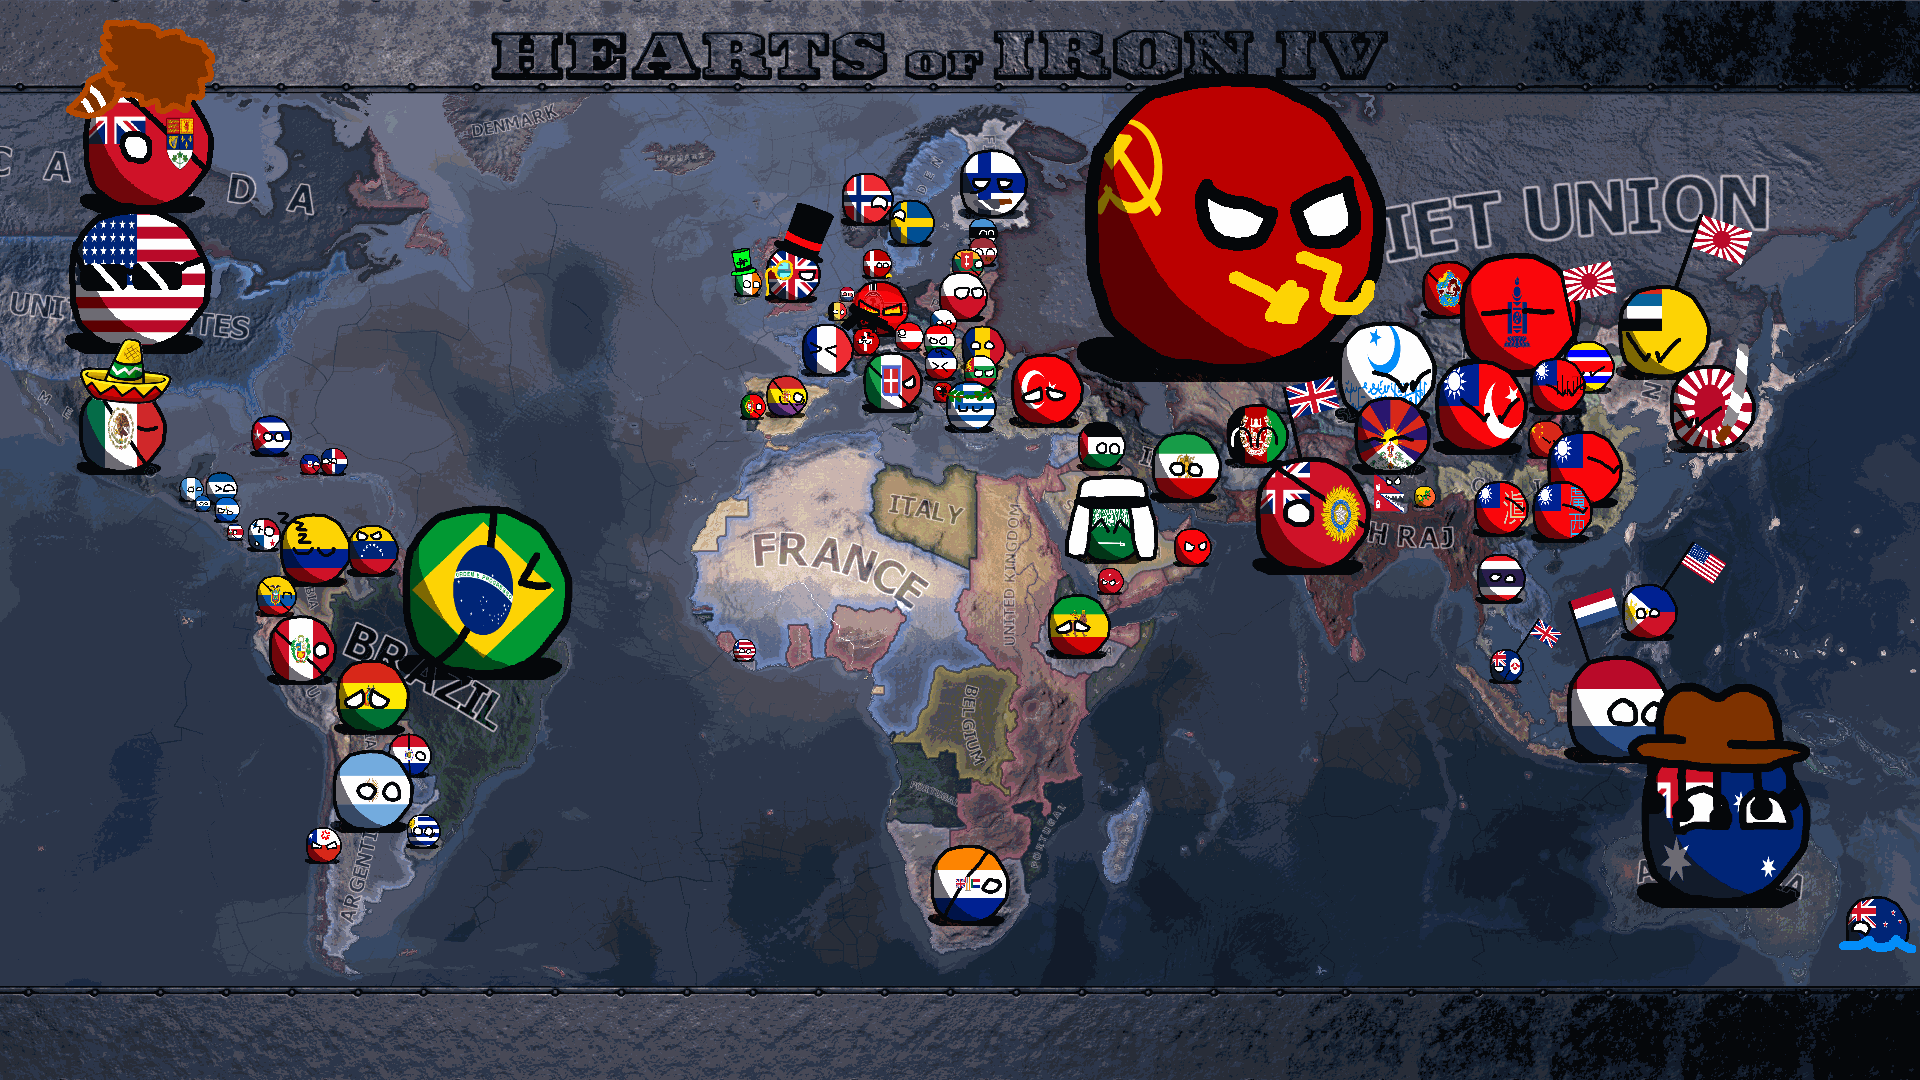 download free countryballs heroes free